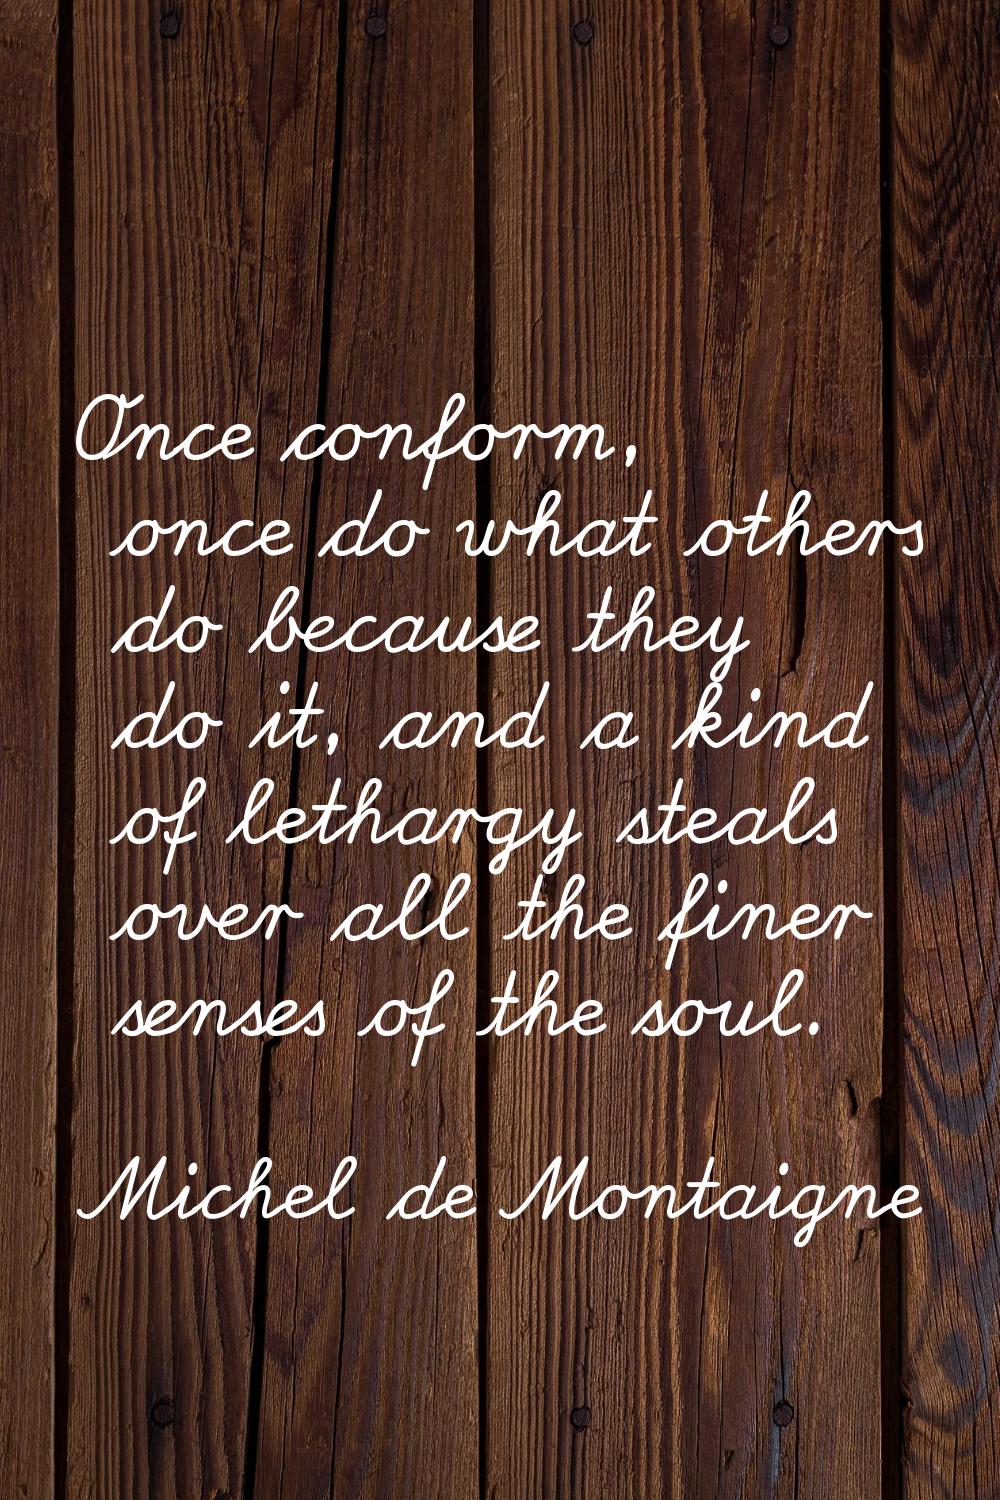 Once conform, once do what others do because they do it, and a kind of lethargy steals over all the